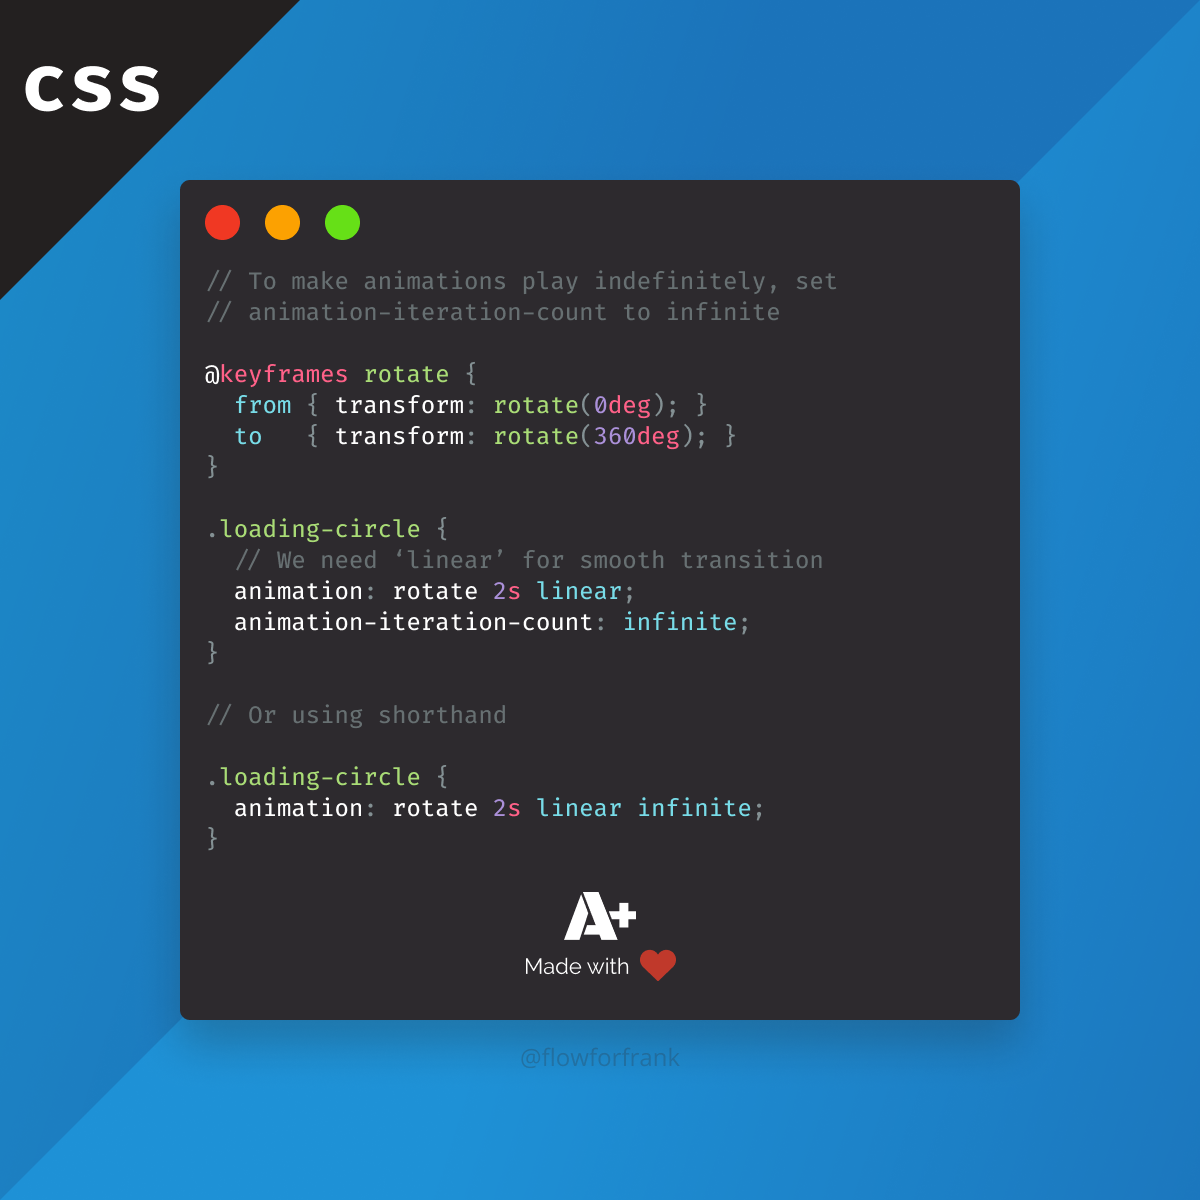 How to Play Animations Infinitely in CSS